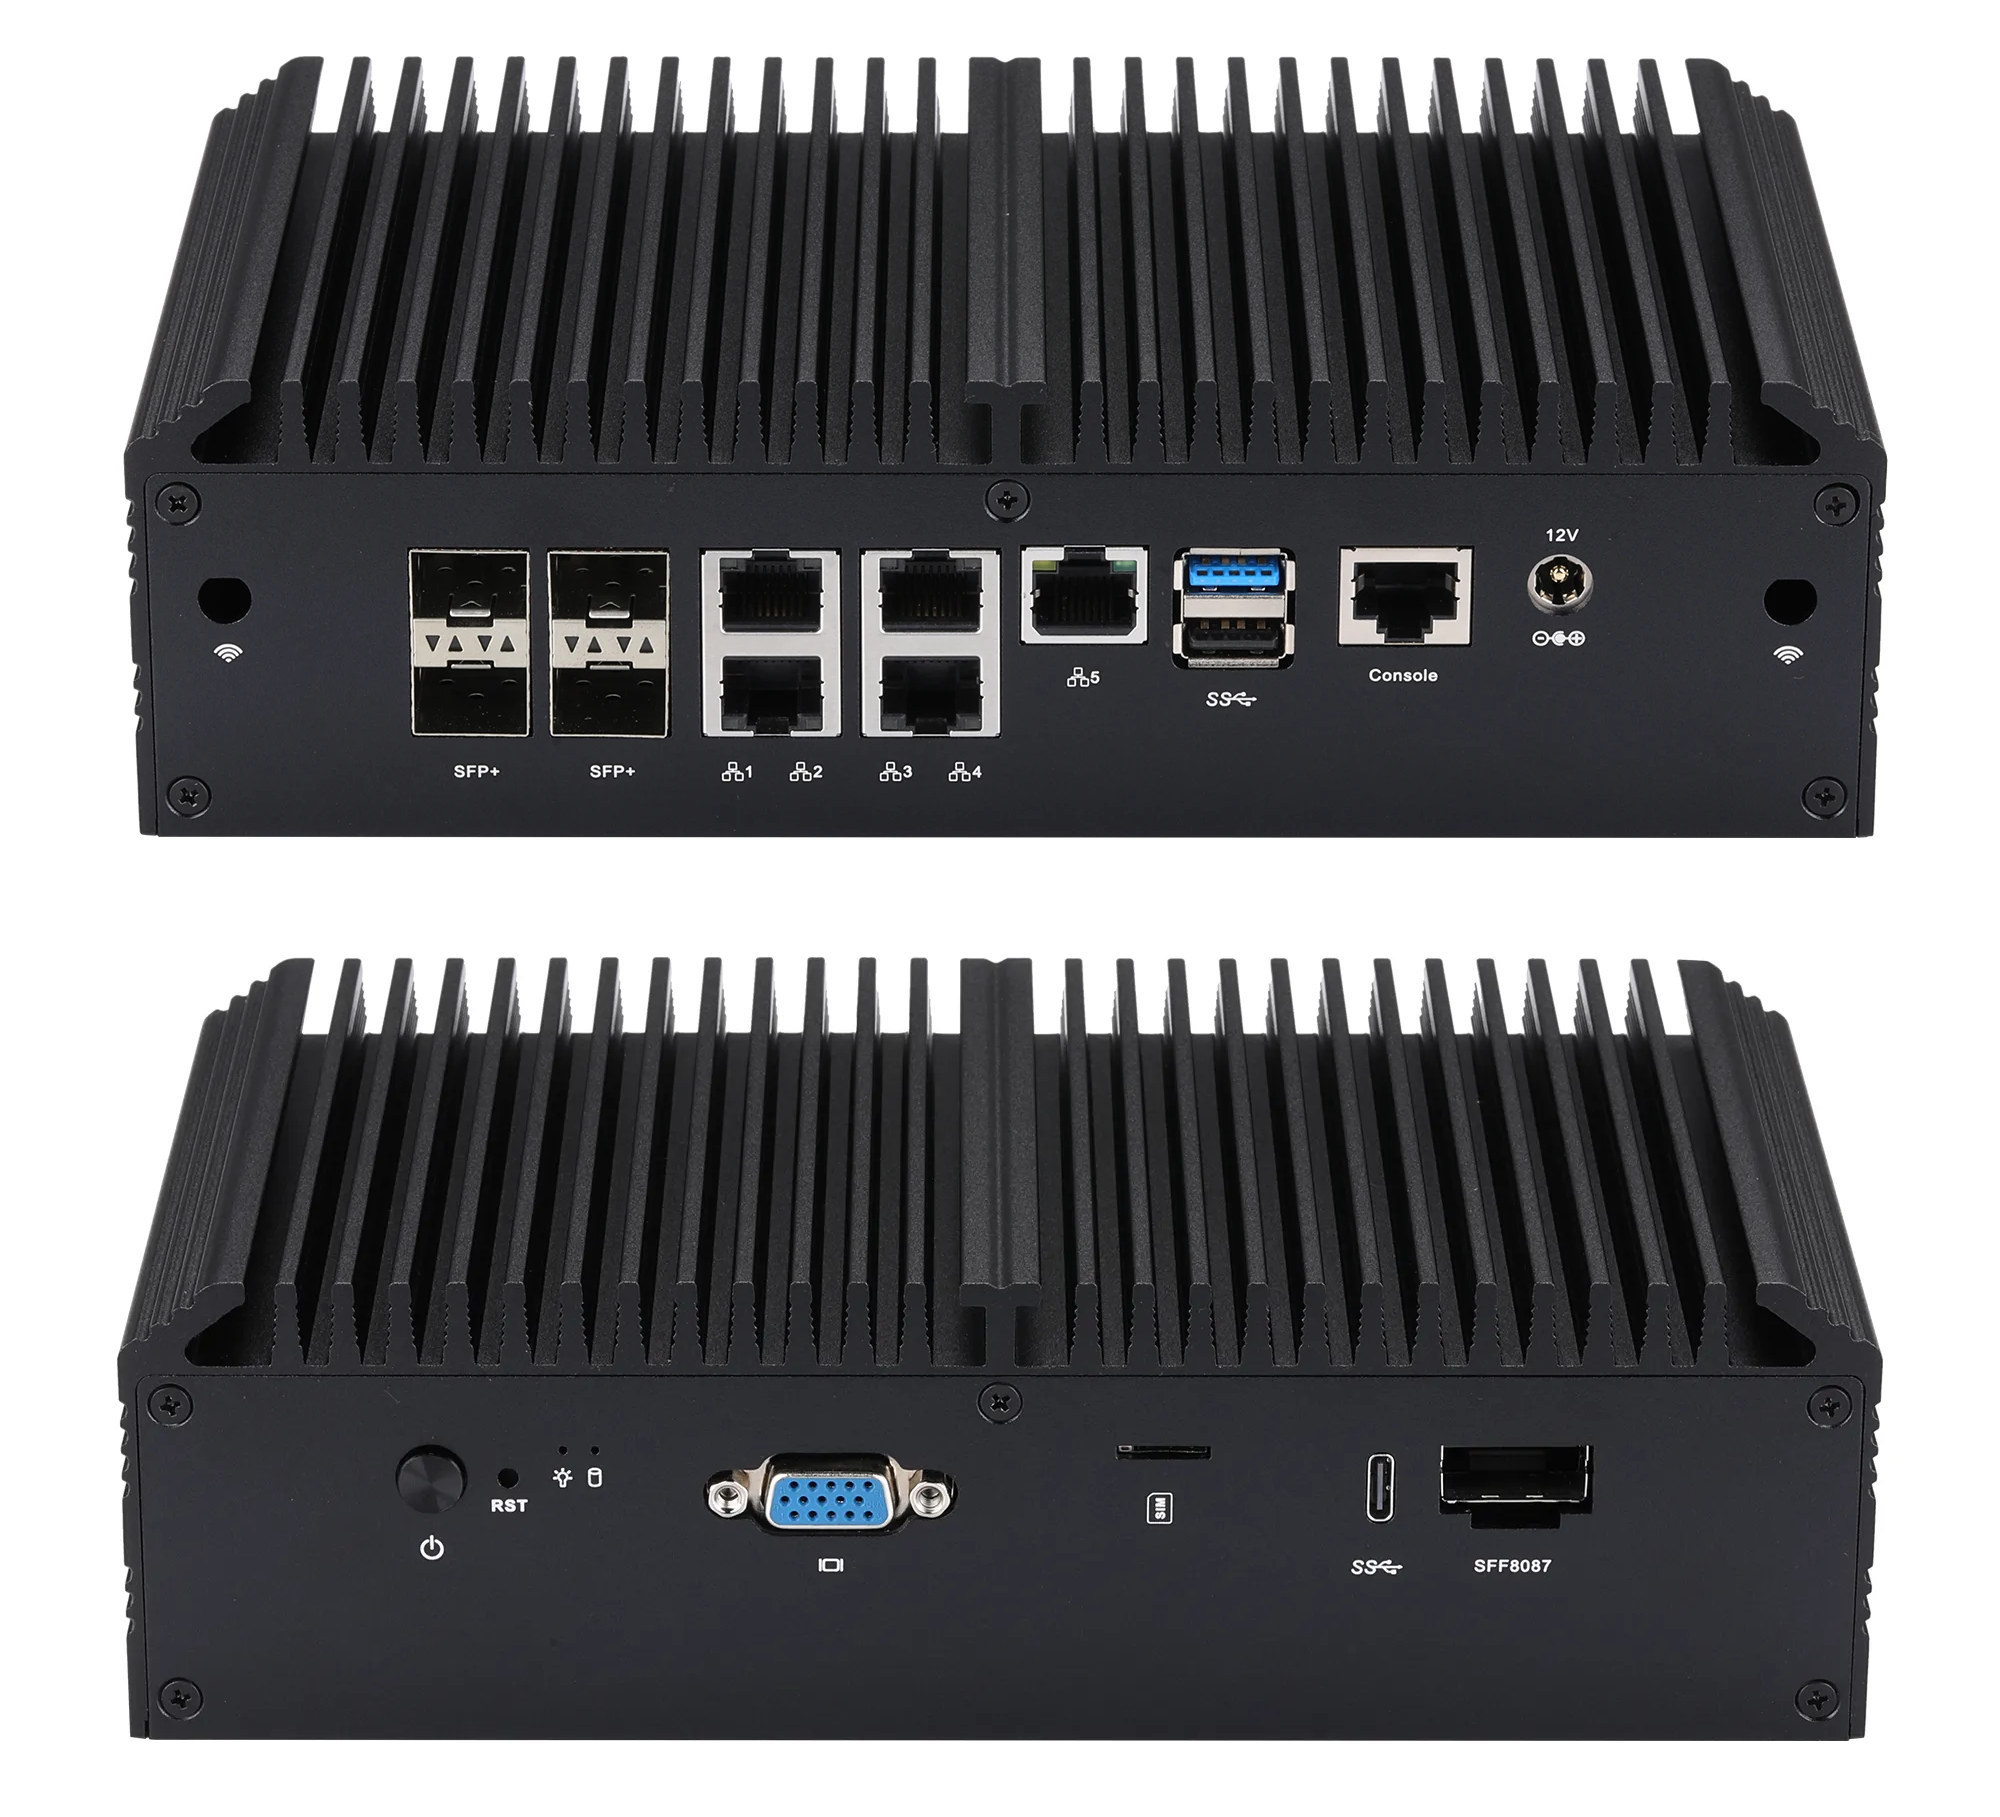 Qotom Q20332G9-S10 fanless mini PC features four 10 GbE and five 2.5GbE  ports - CNX Software